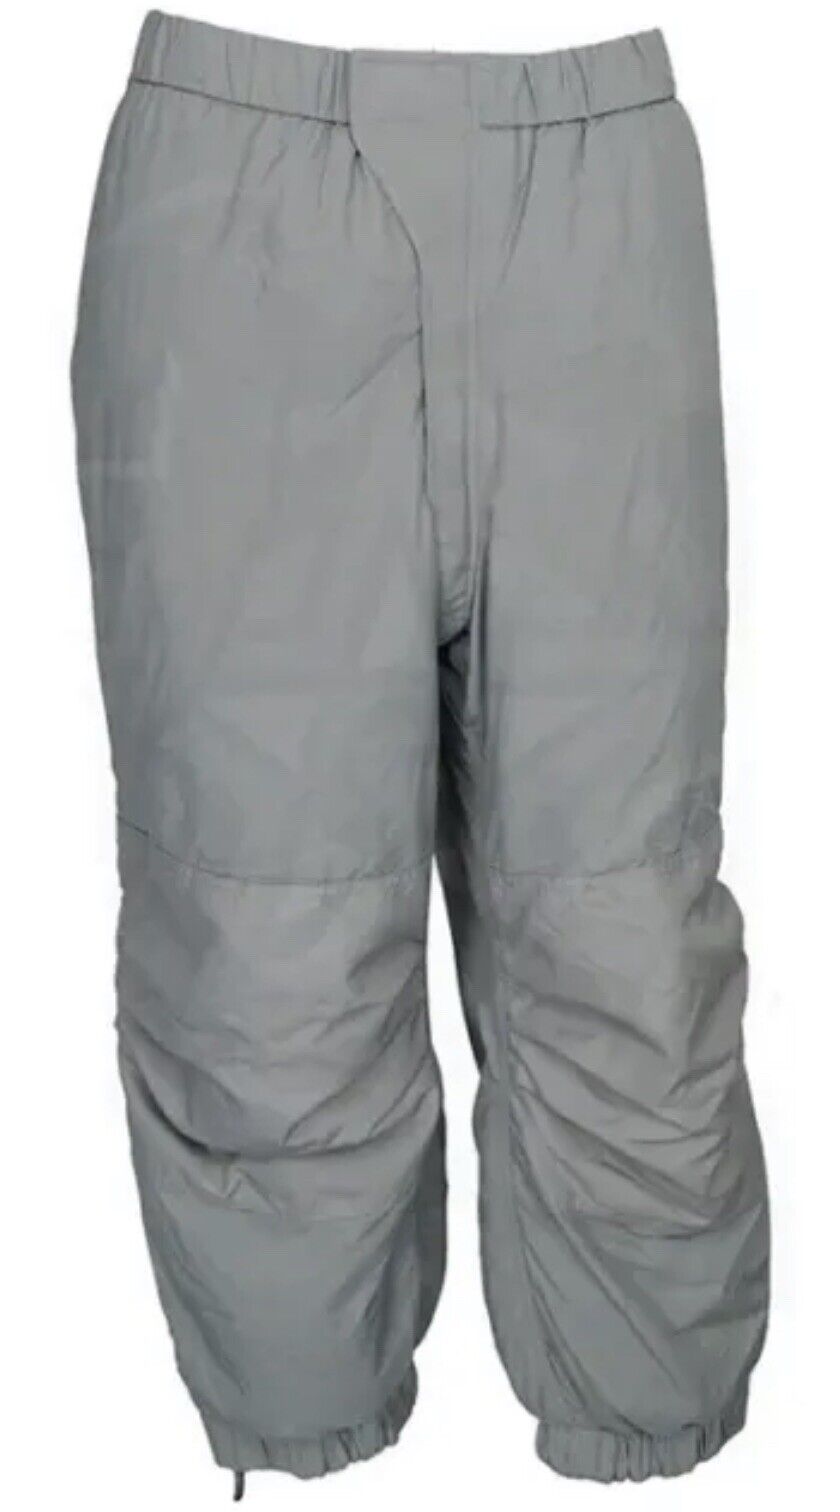 New* Authentic USGI GEN III Level 7 ECWCS Cold Weather Trouser Pant LARGE/LONG